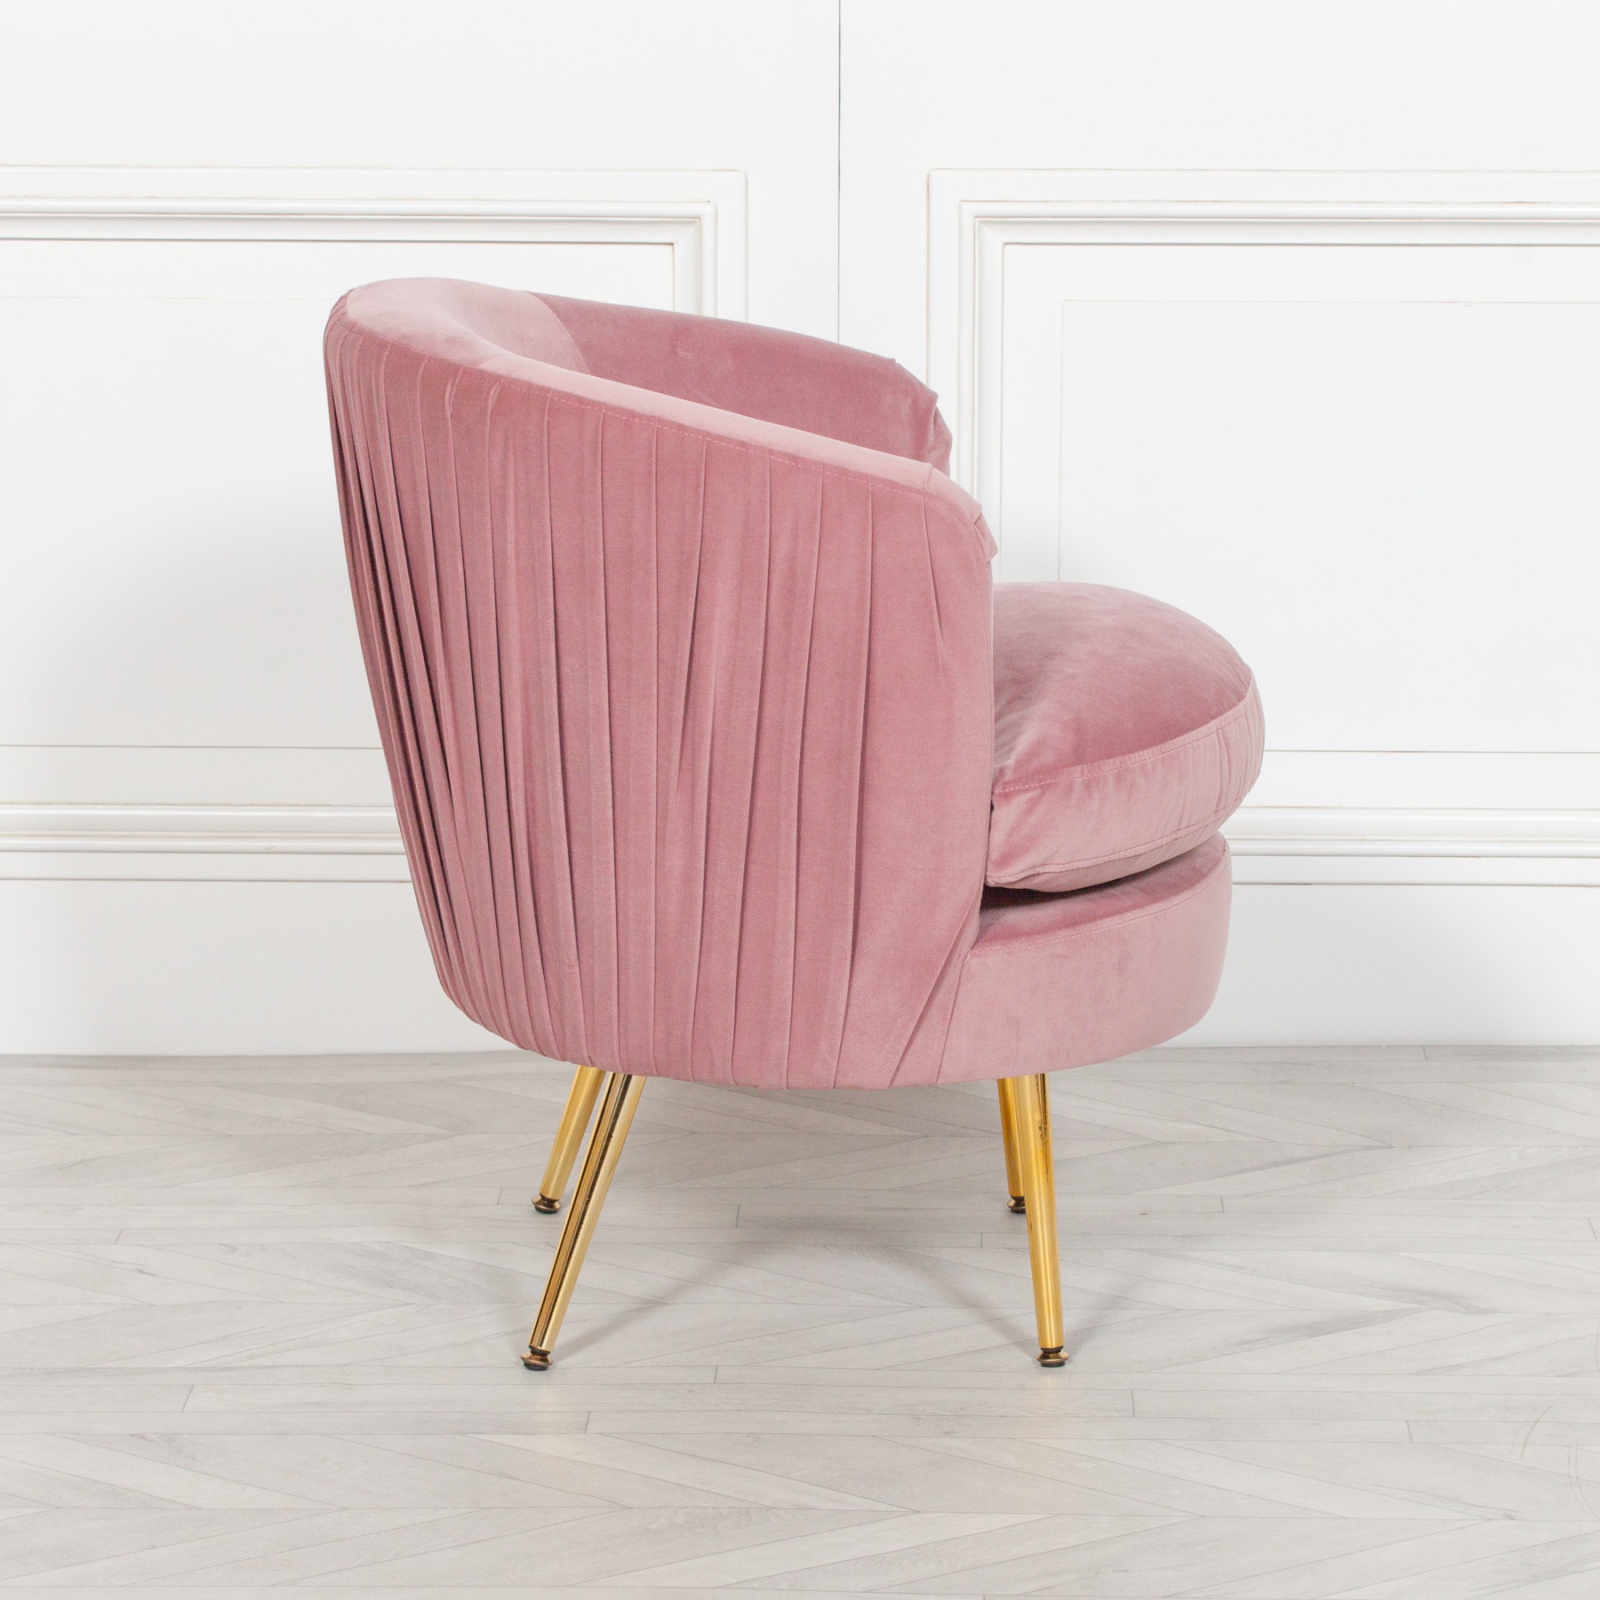 Lovely Pink Bedroom Chair 50 Ideas Lpbc Wtsenates Info We carry all the latest styles, colours and brands for you to choose from right here. lovely pink bedroom chair 50 ideas